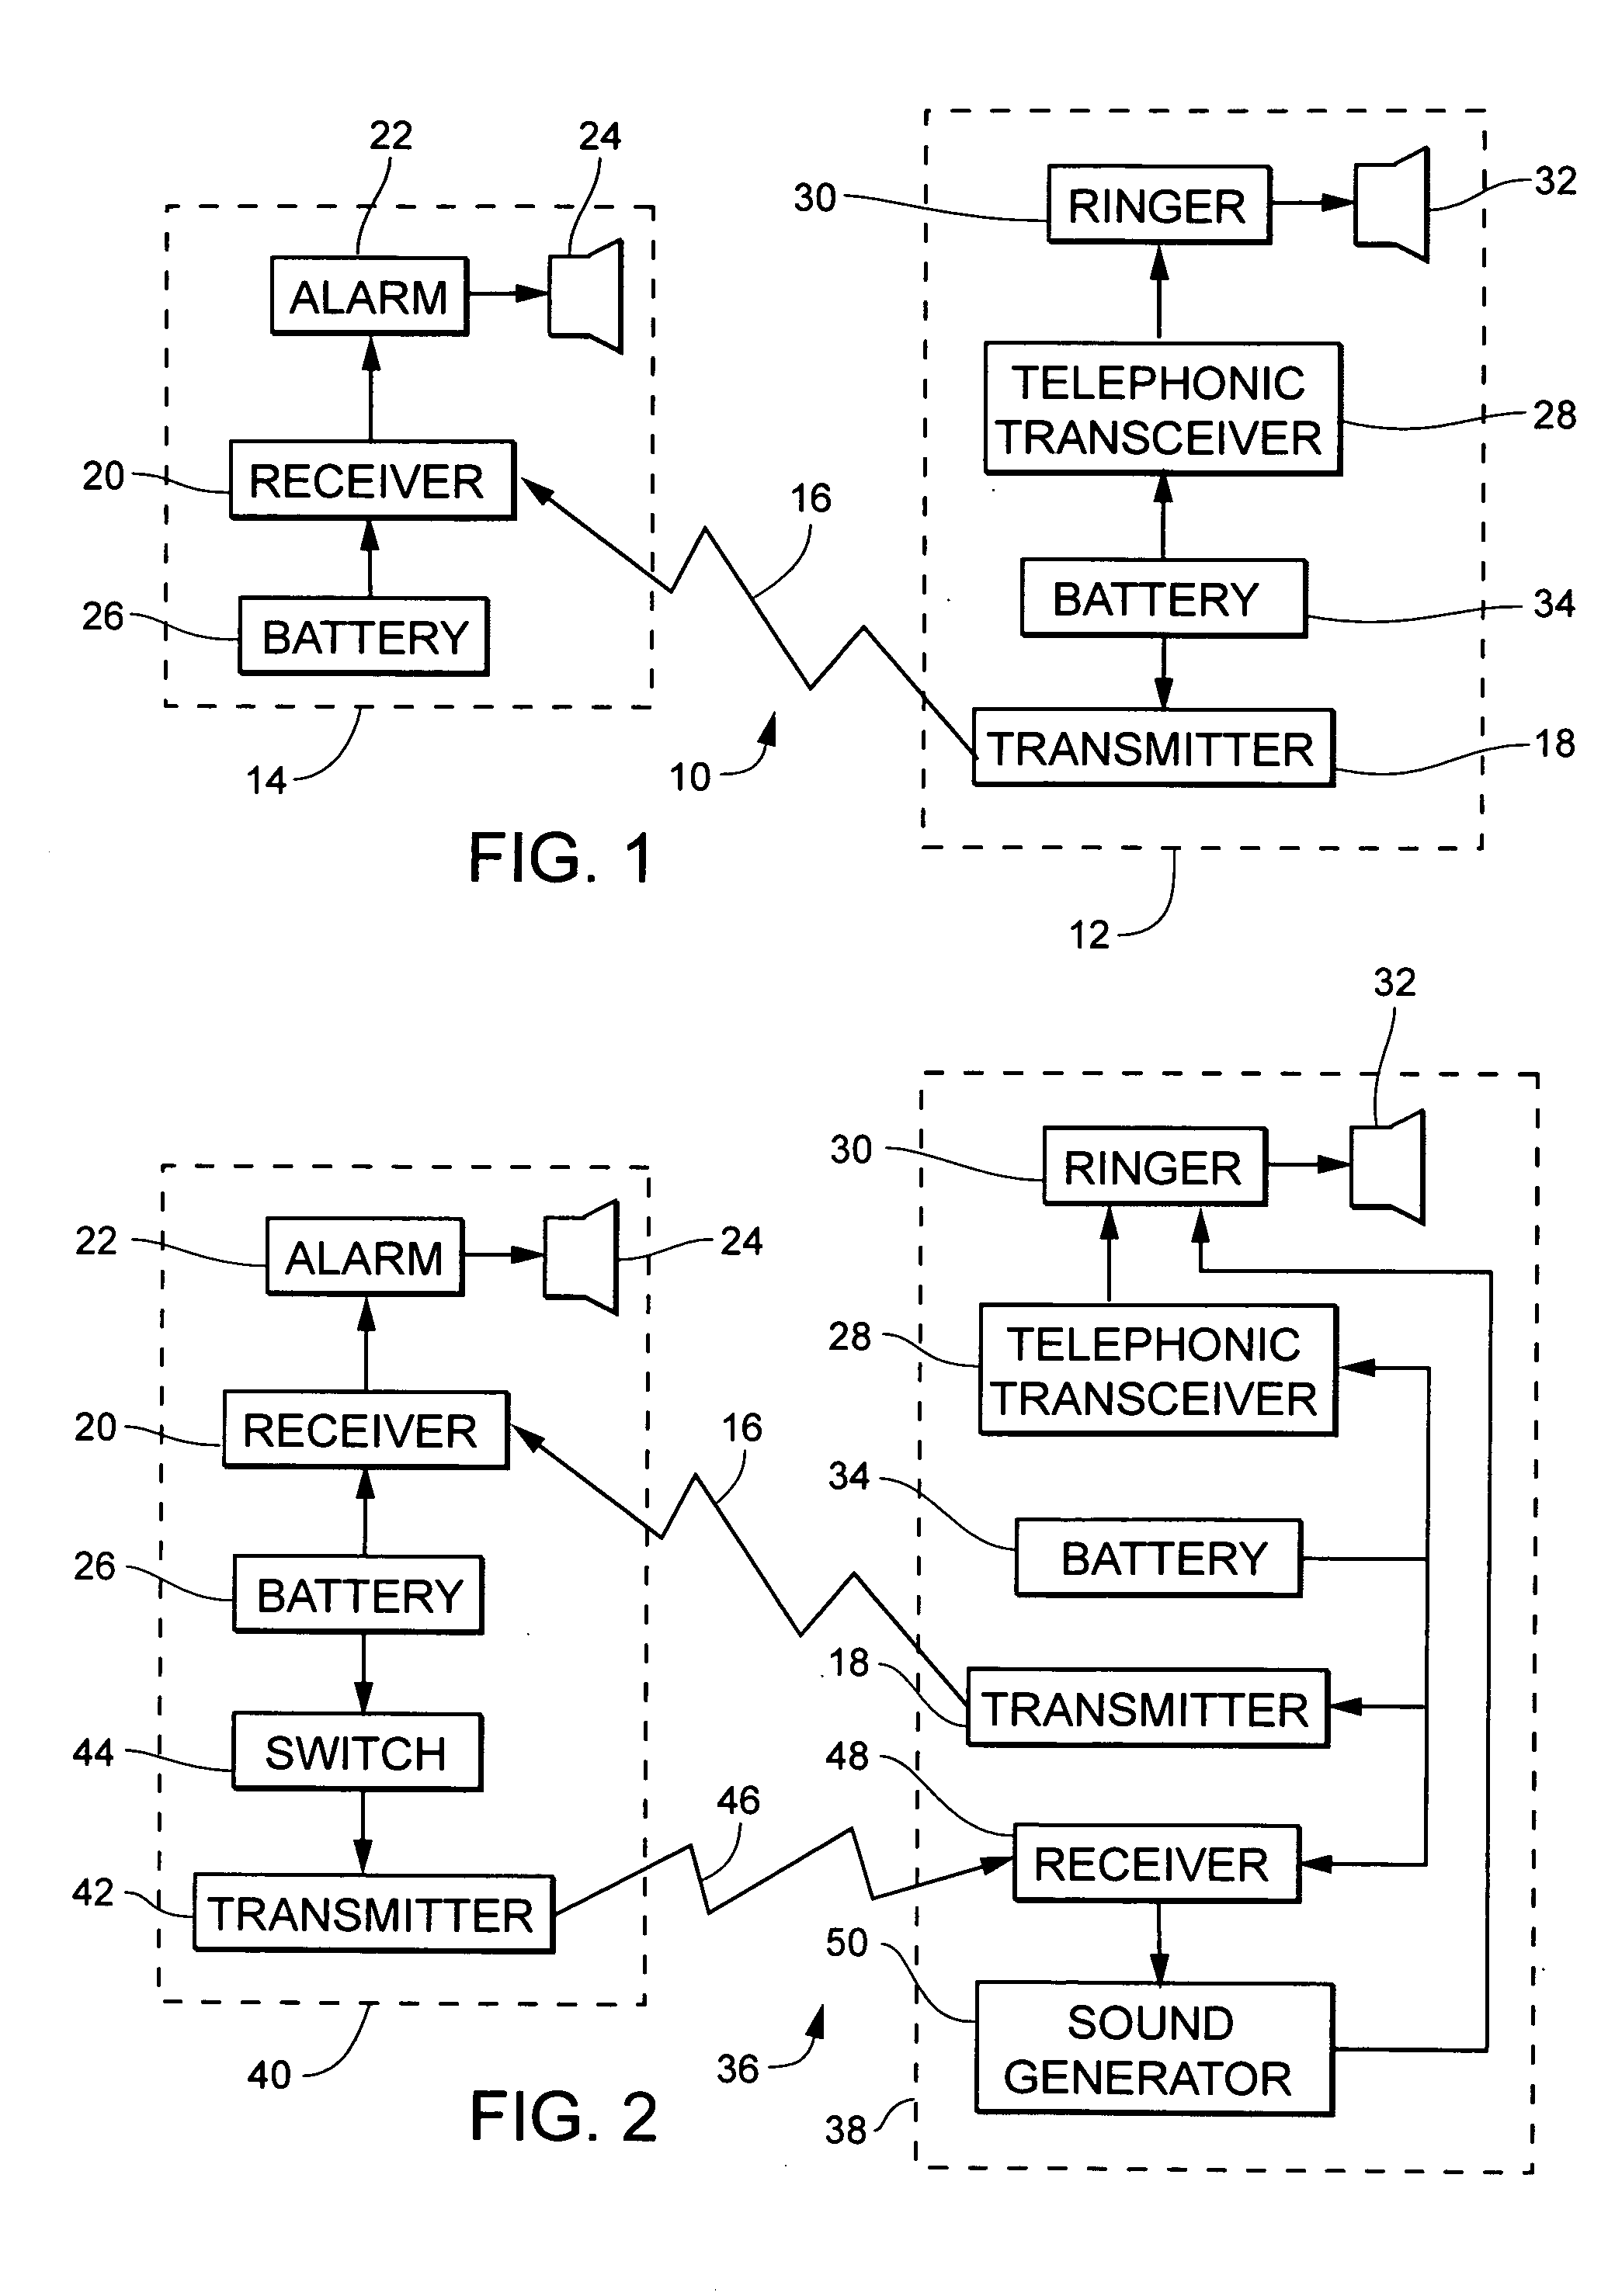 Apparatus and method for preventing loss of a mobile telephone and for locating a lost mobile telephone